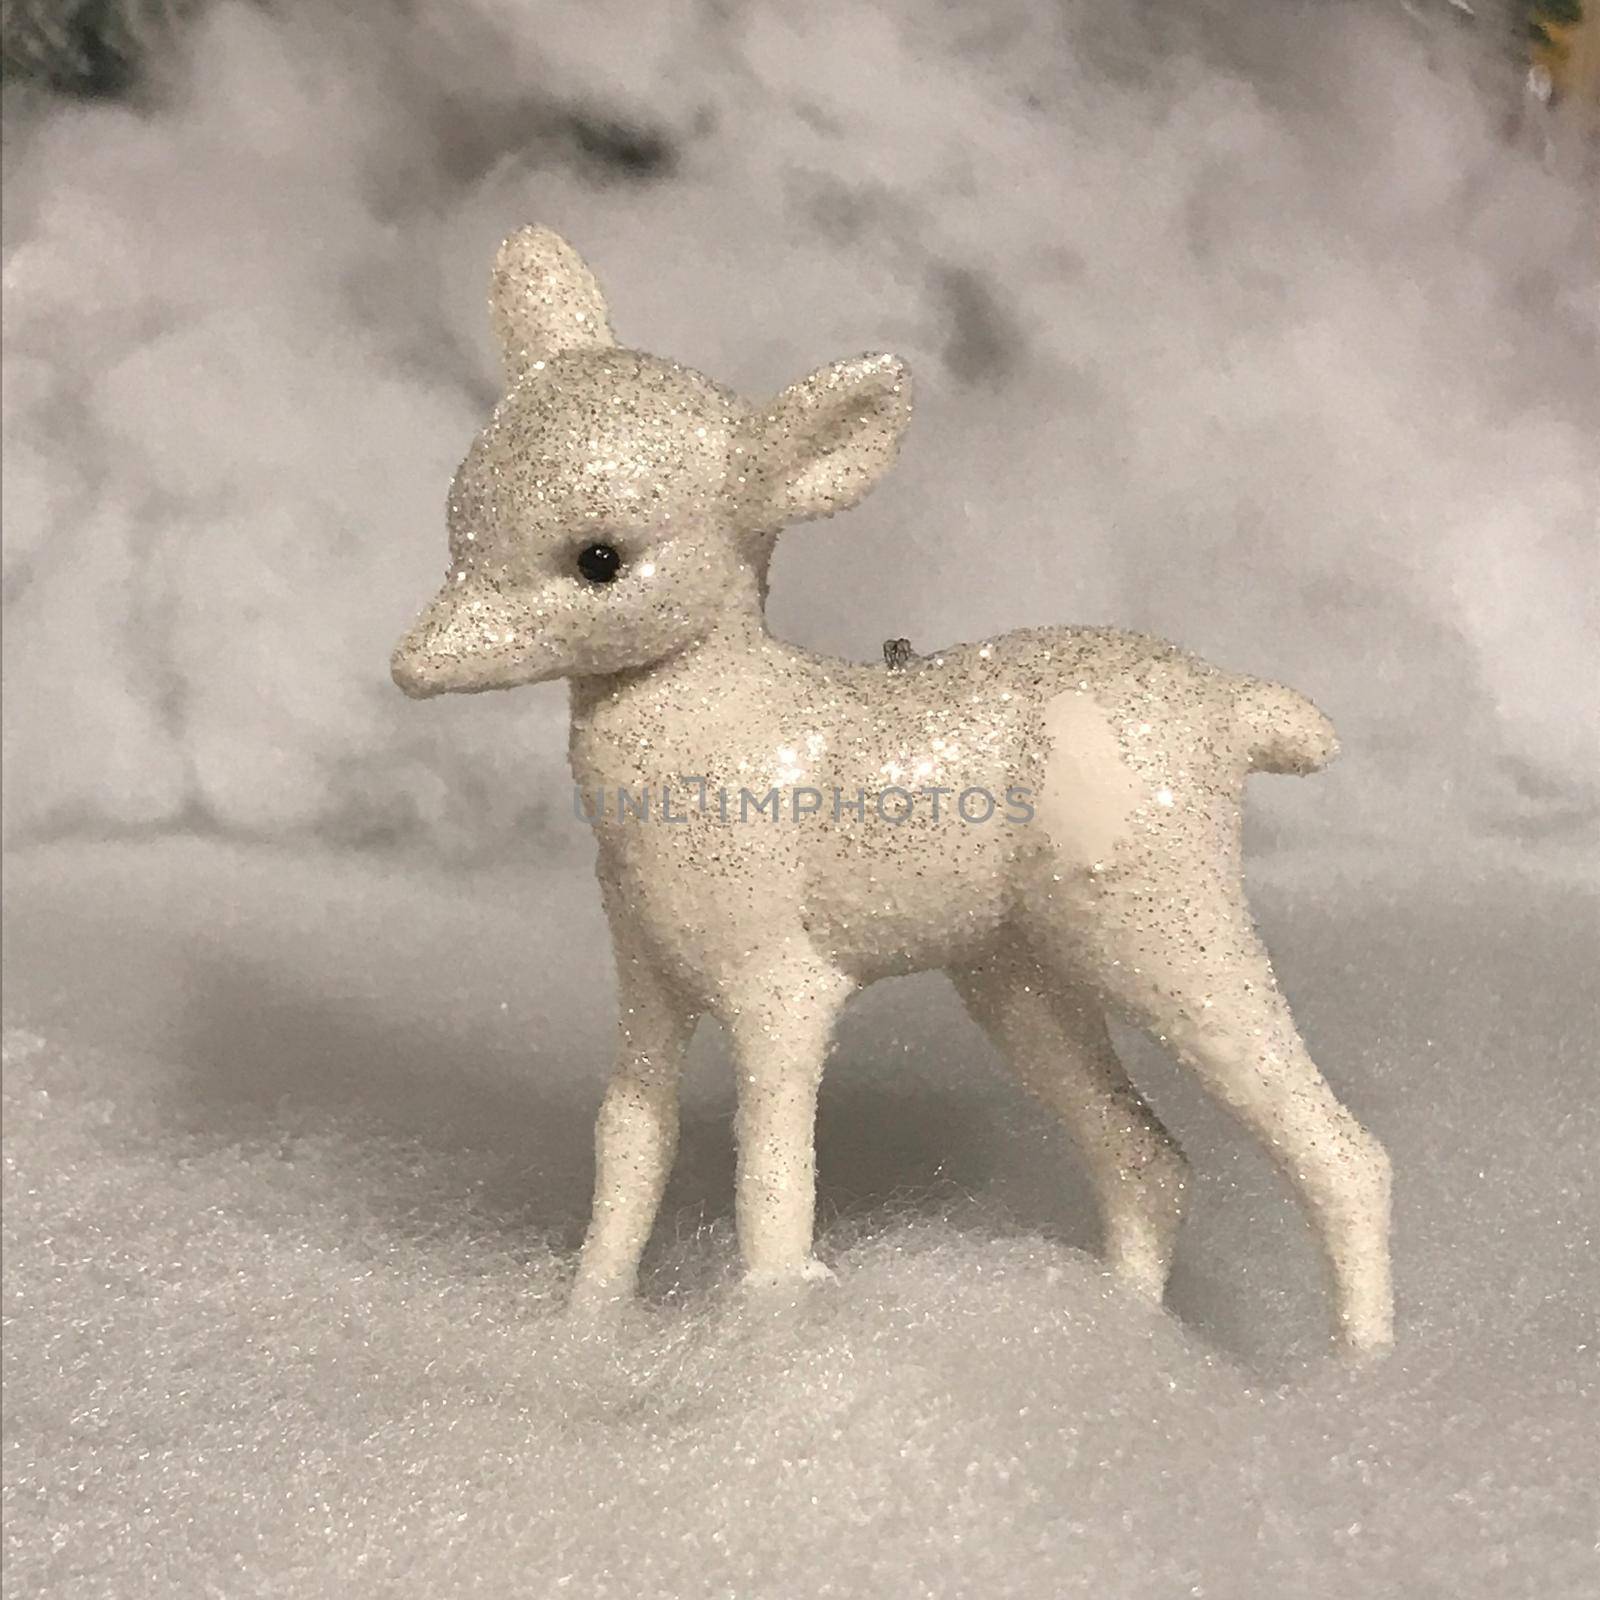 Christmas scene with glitter lamb statue and fake snow by LeoniekvanderVliet